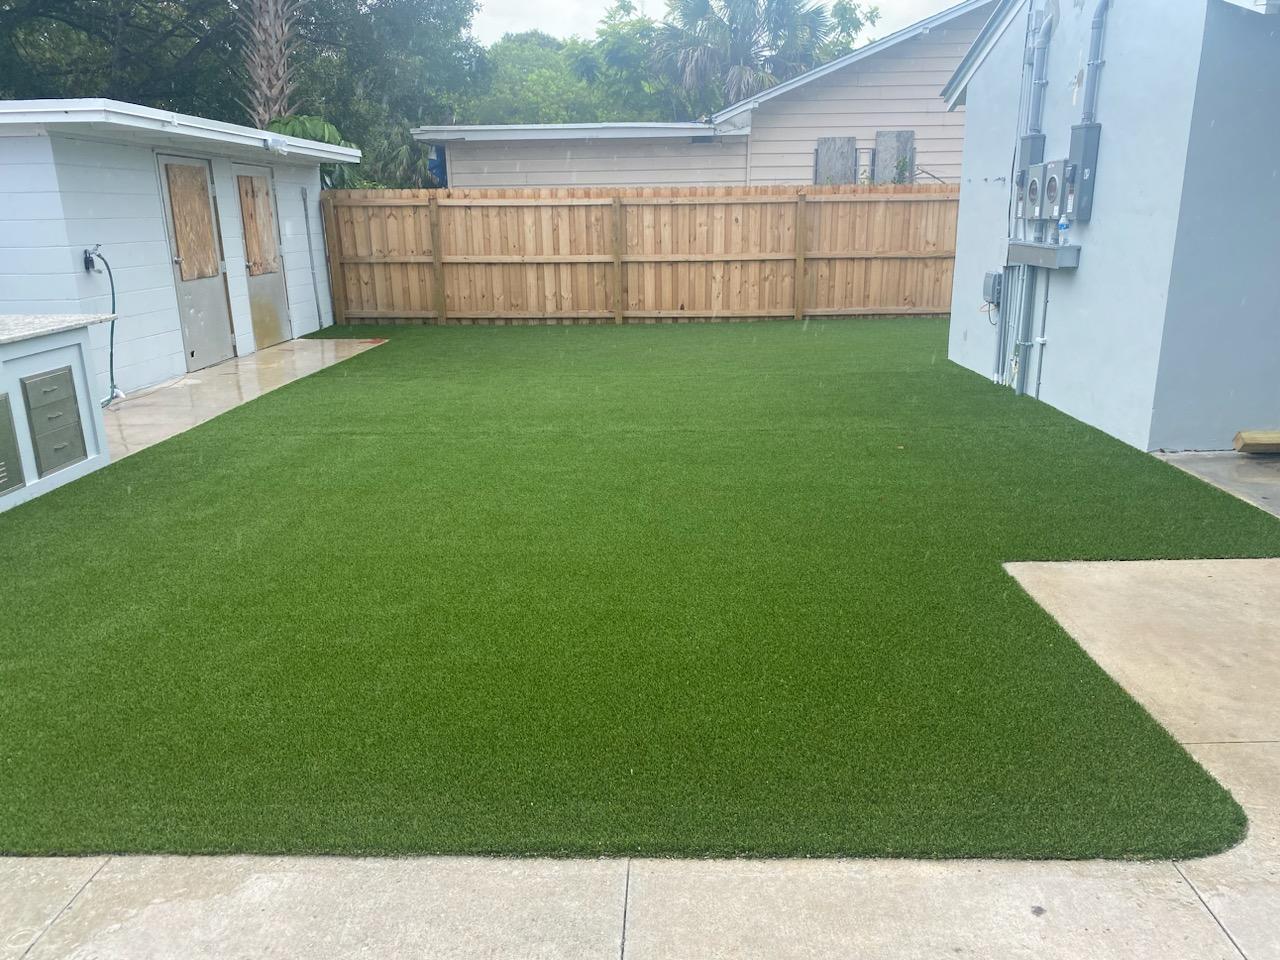 Artificial Grass installed by Neptune Nursery in Palm City, FL.